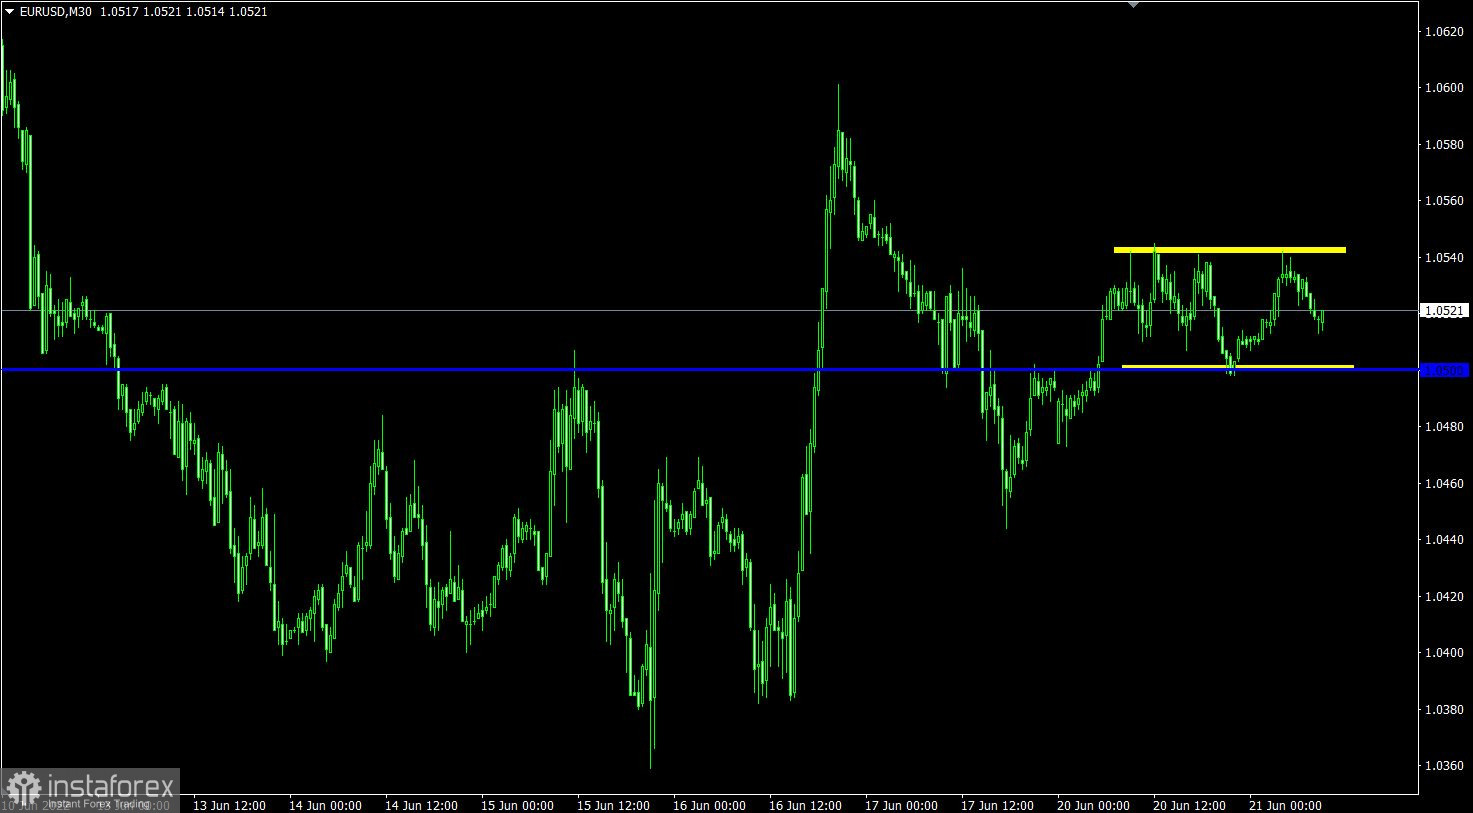 Trading plan for EUR/USD and GBP/USD on June 21, 2022